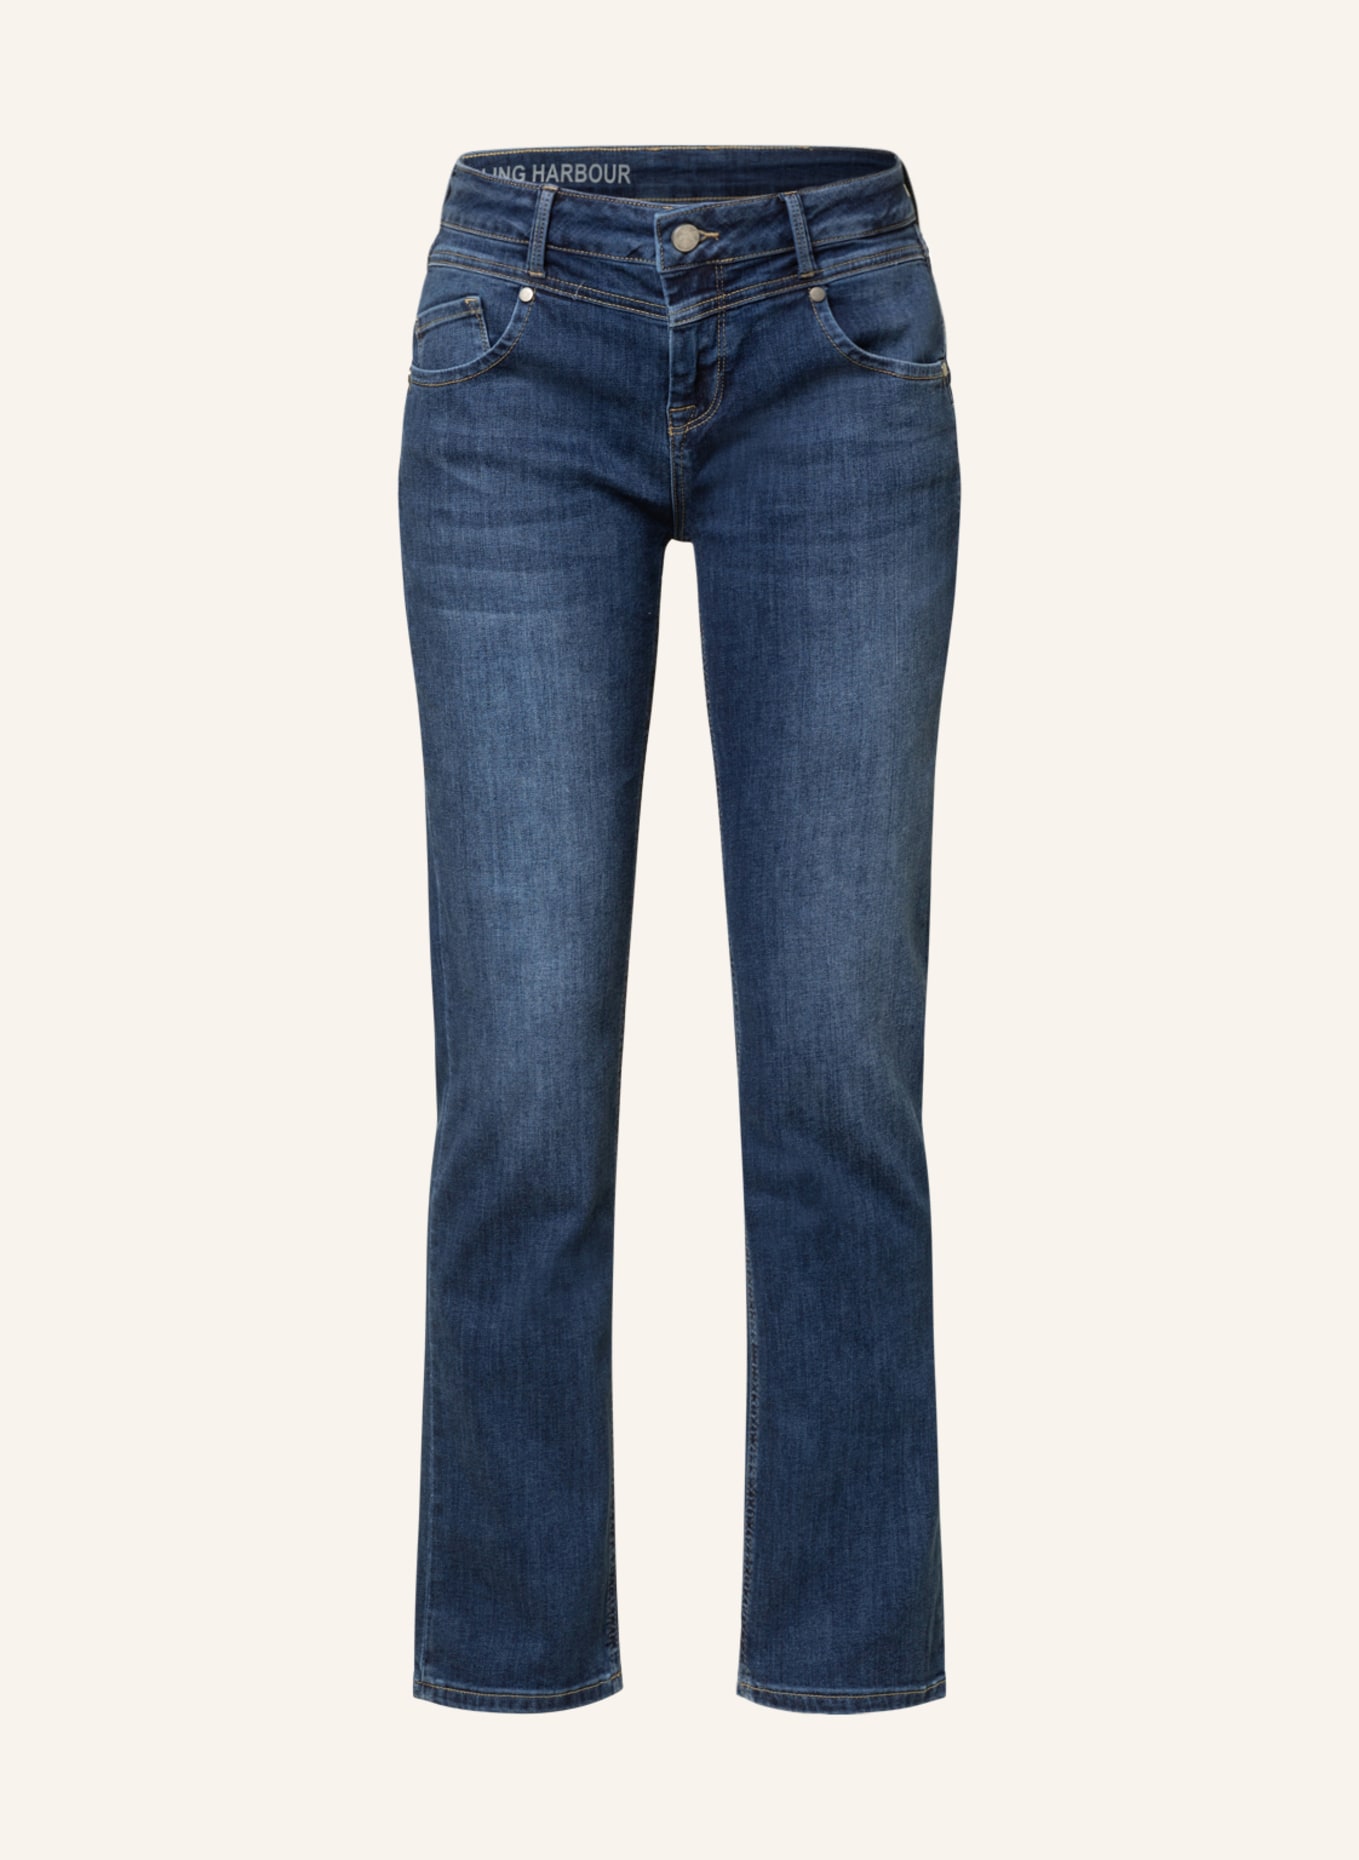 darling harbour Straight jeans, Color: DARK BLUE USED (Image 1)